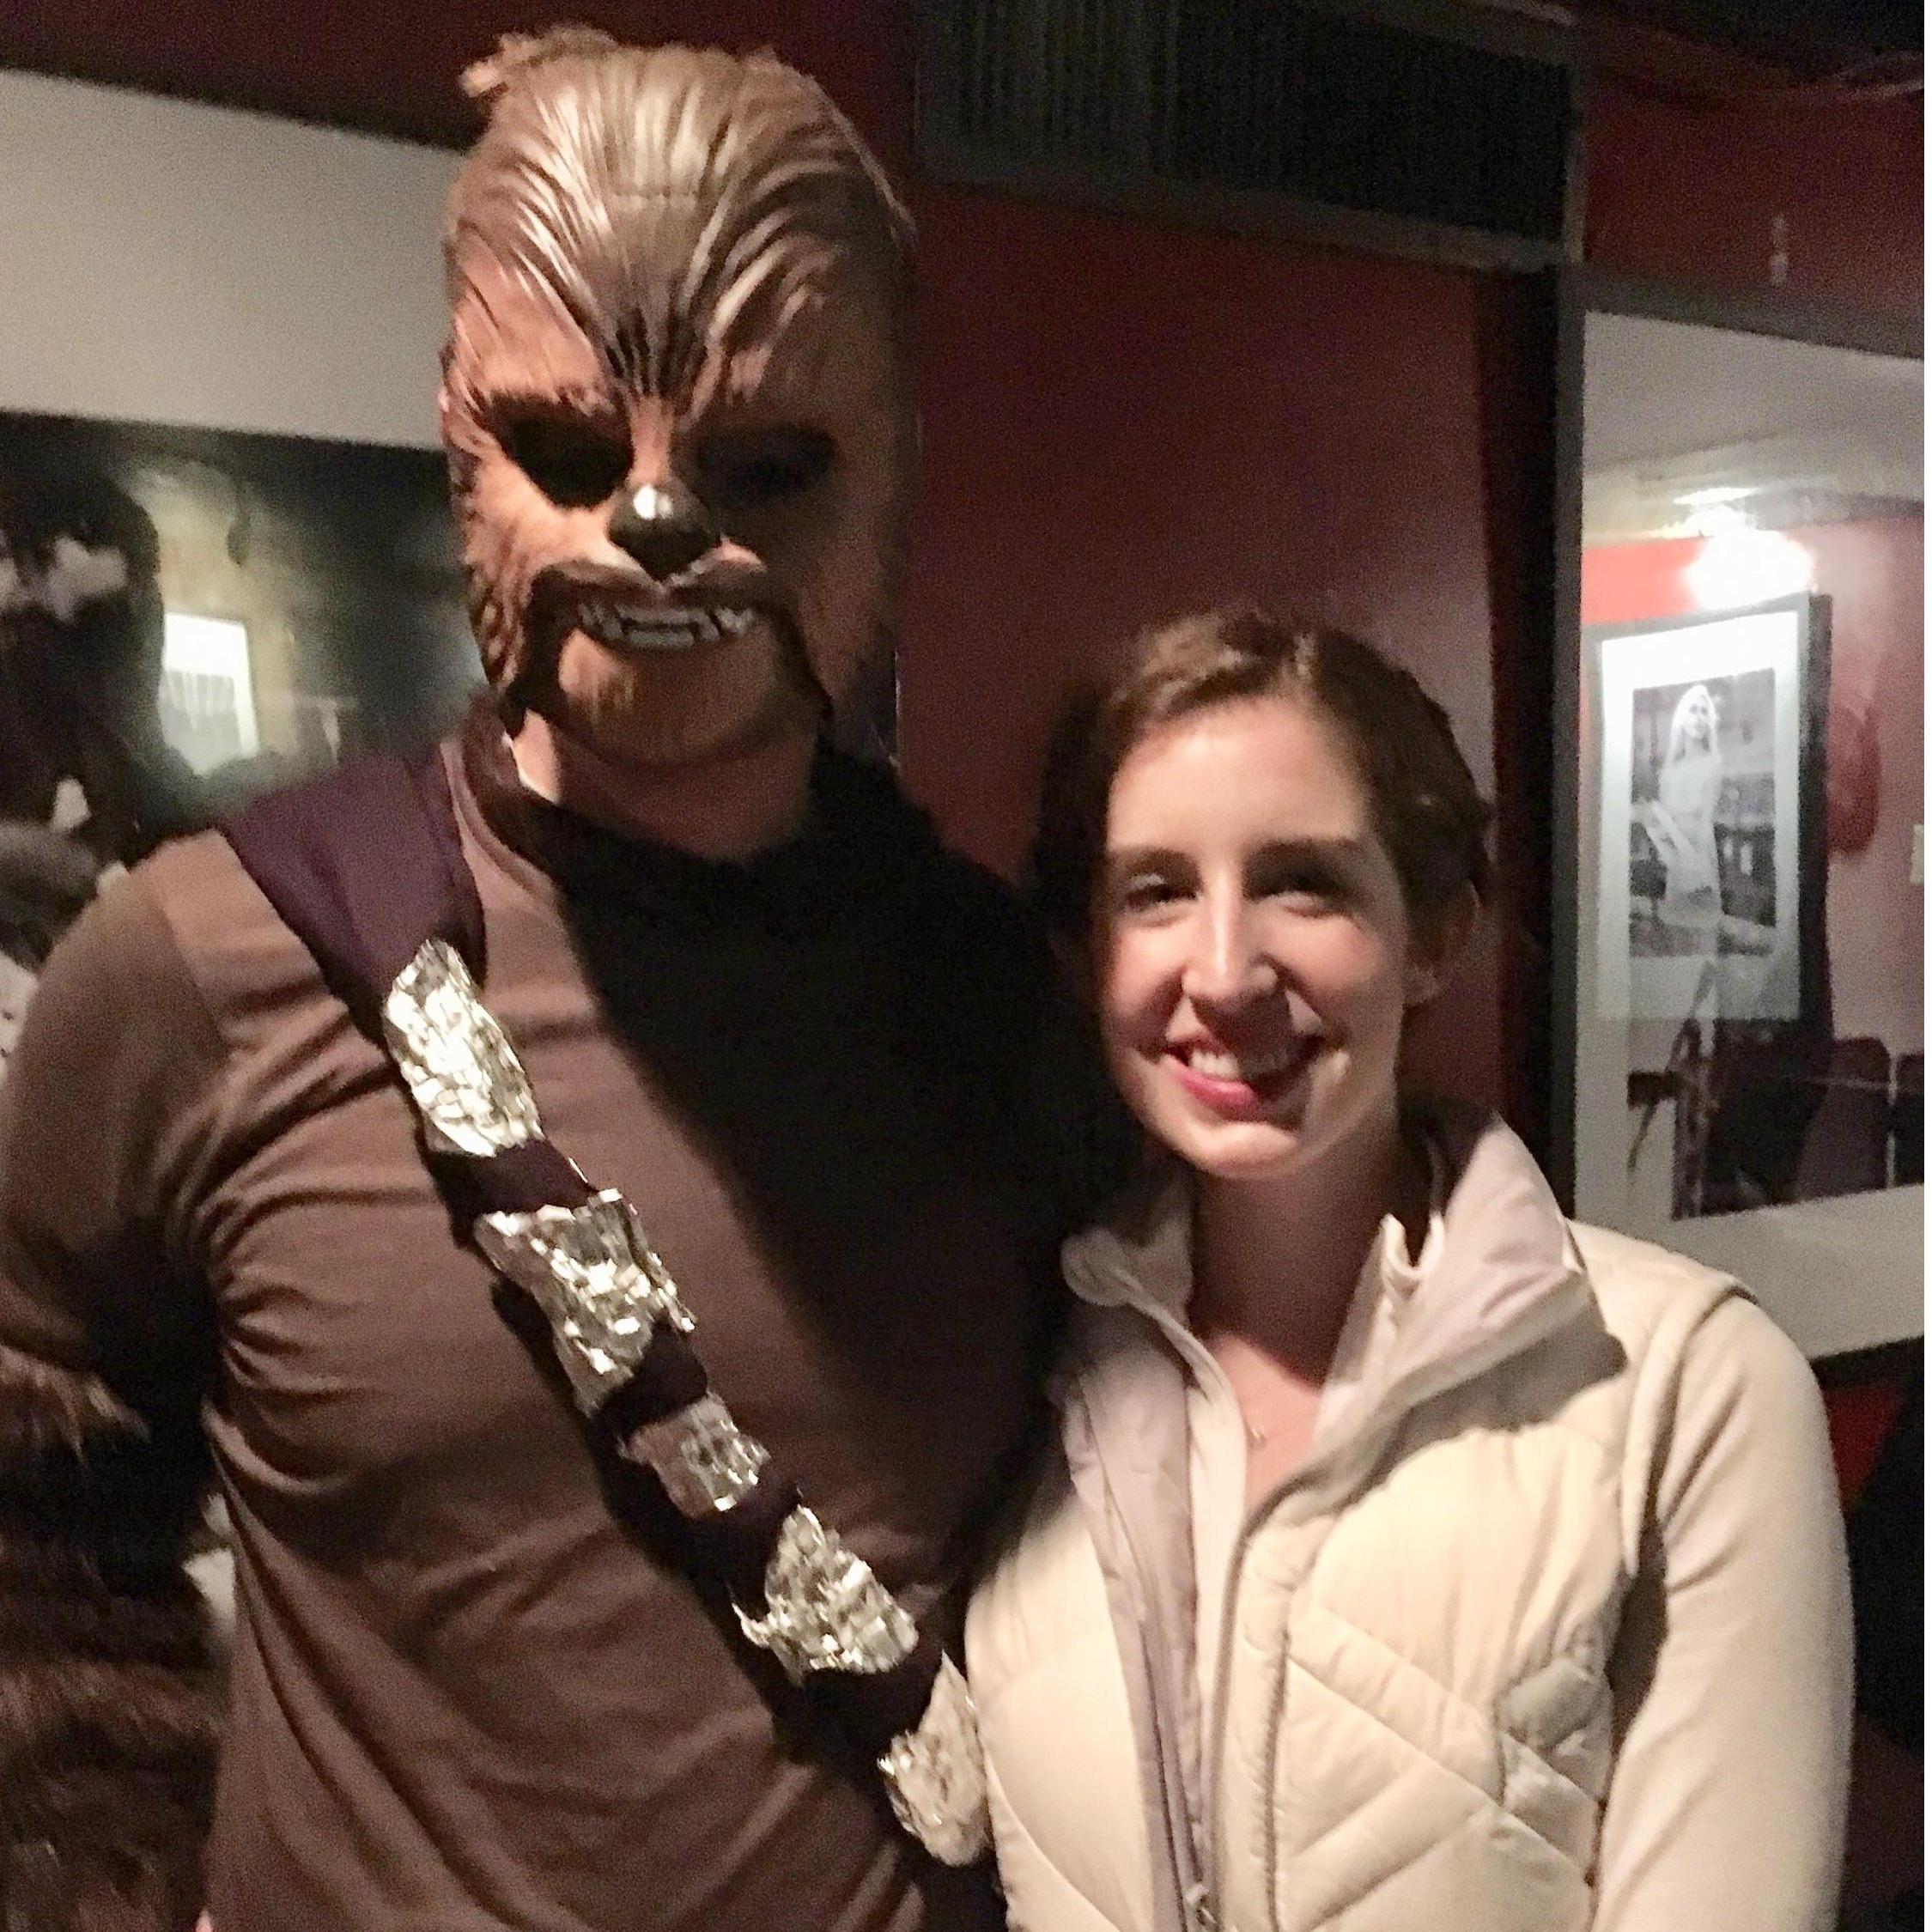 I'd rather kiss a Wookiee ;)